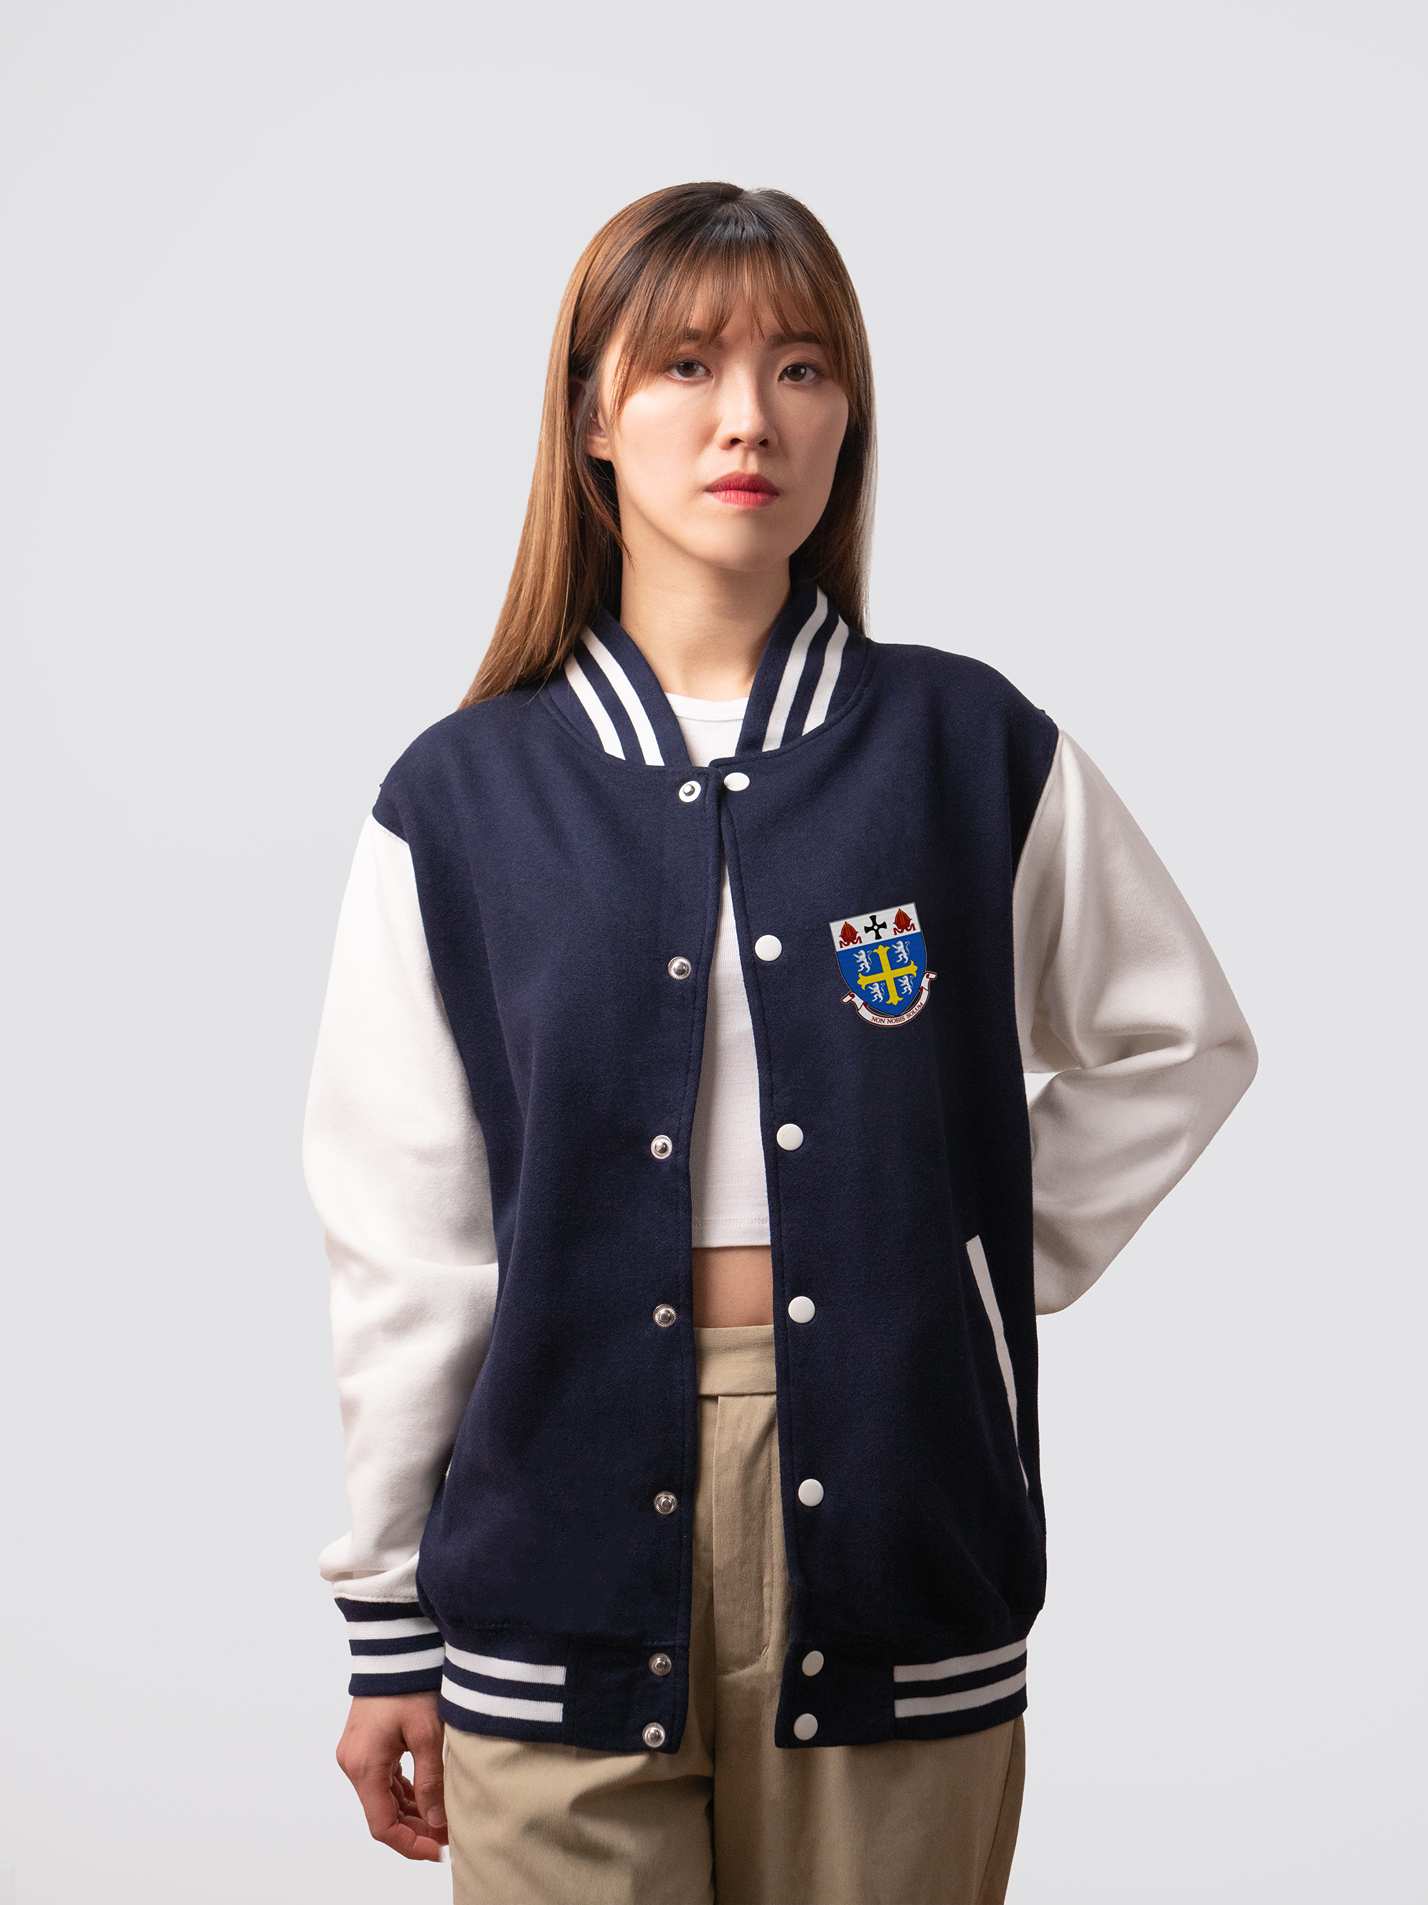 Retro style varsity jacket, with embroidered University College crest